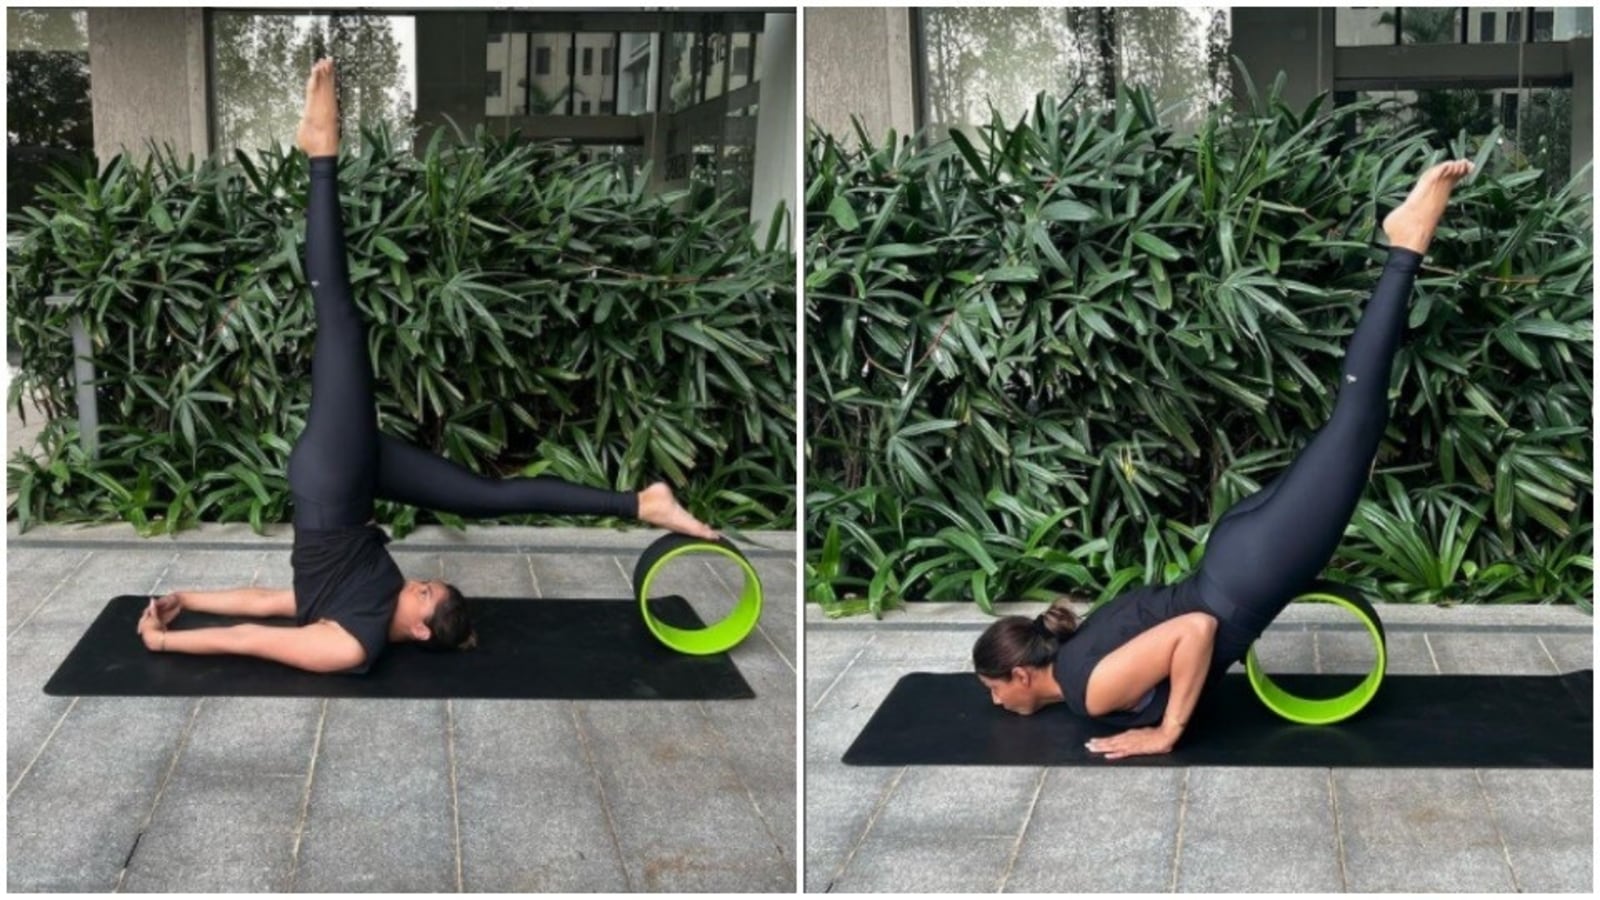 BACK PAIN? TRY THIS YOGA WHEEL POSE